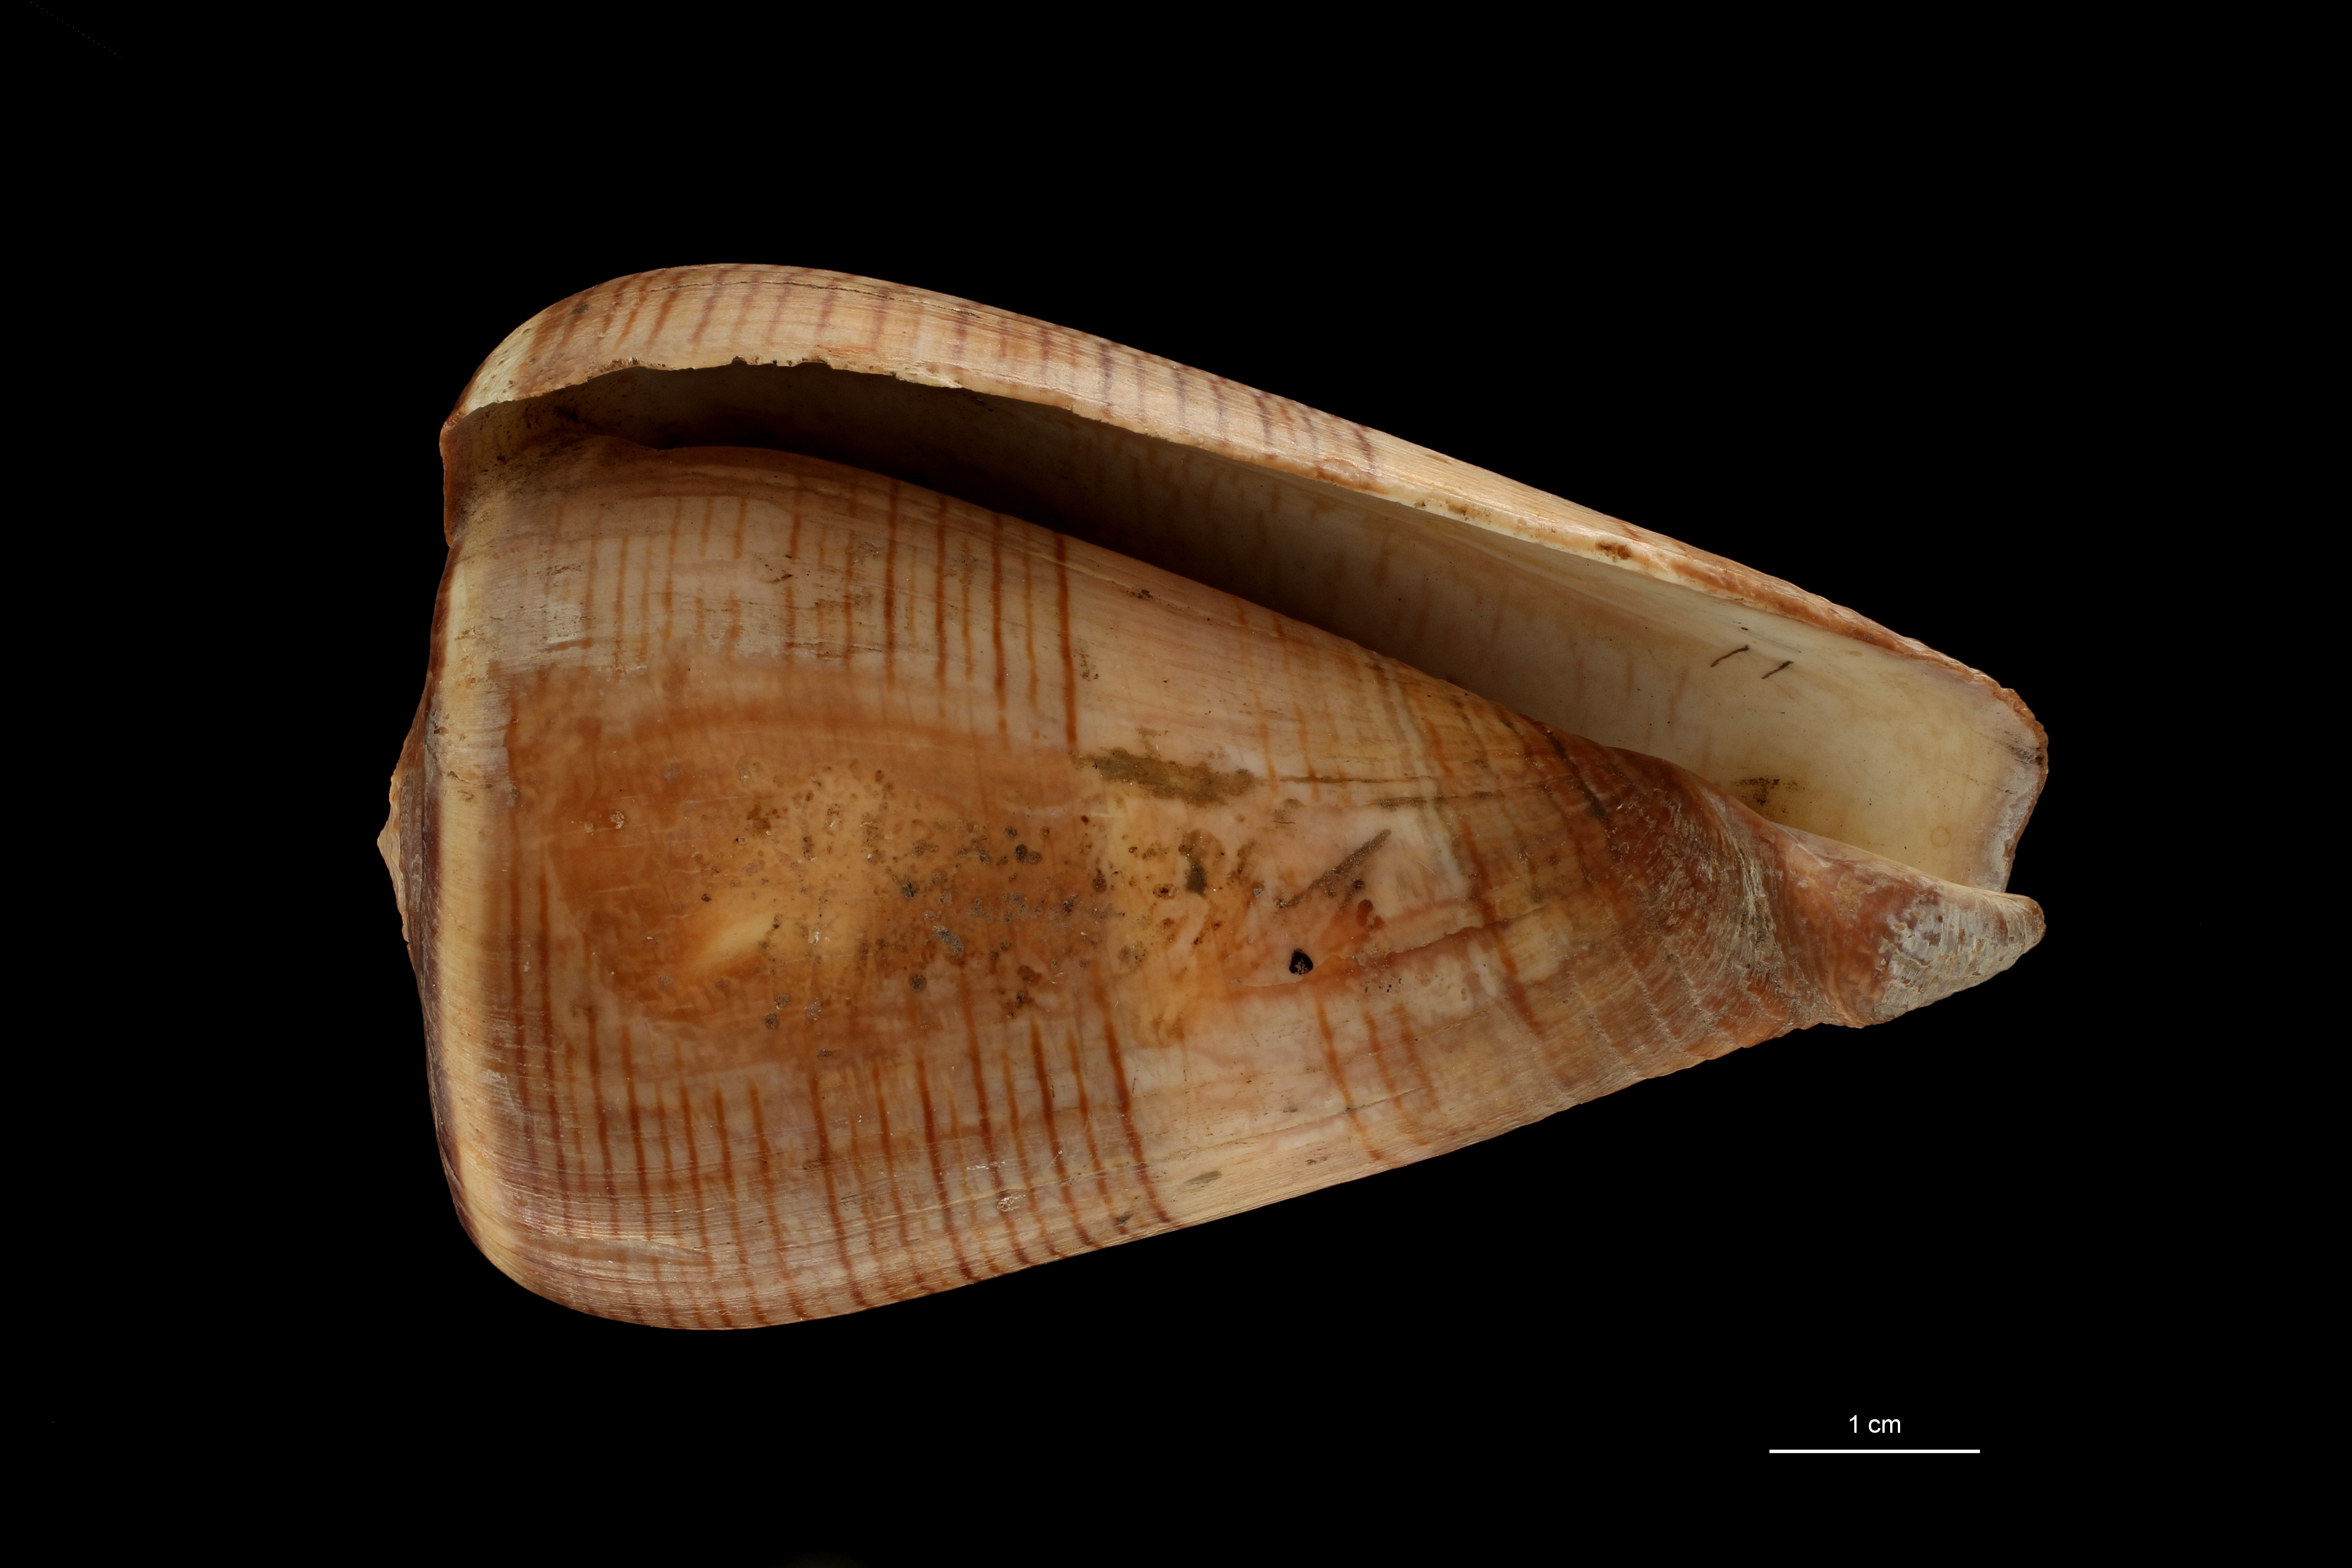 BE-RBINS-INV HOLOTYPE MT.2532 Conus figulinus var. insignis VENTRAL ZS PMax Scaled.jpg